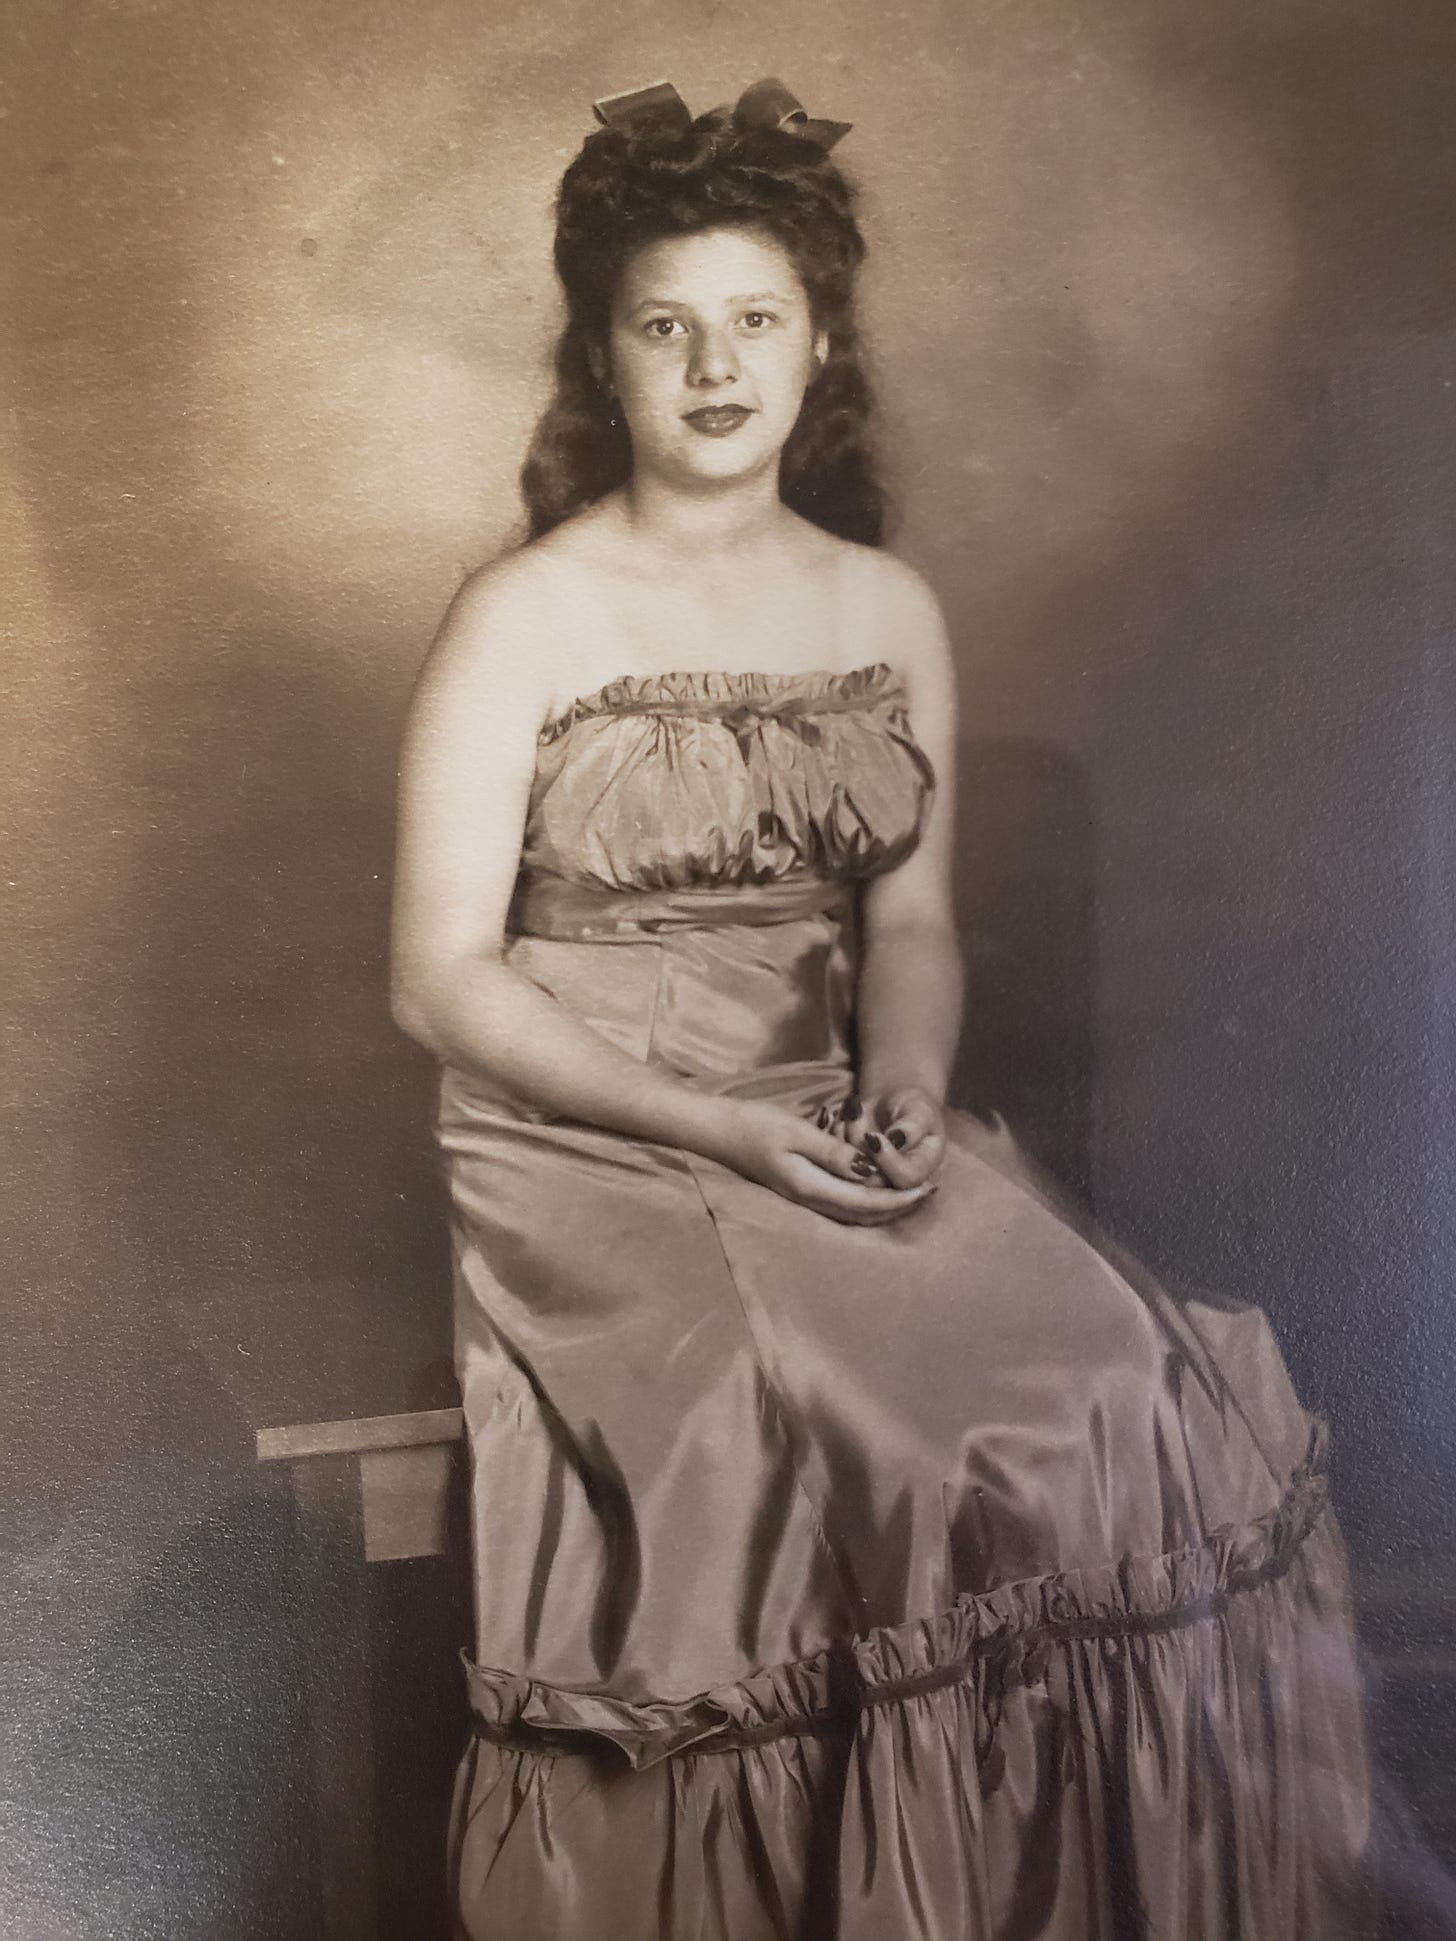 Photograph of Anita Juarez as a young woman, posing in a dress, seated, hands in lap